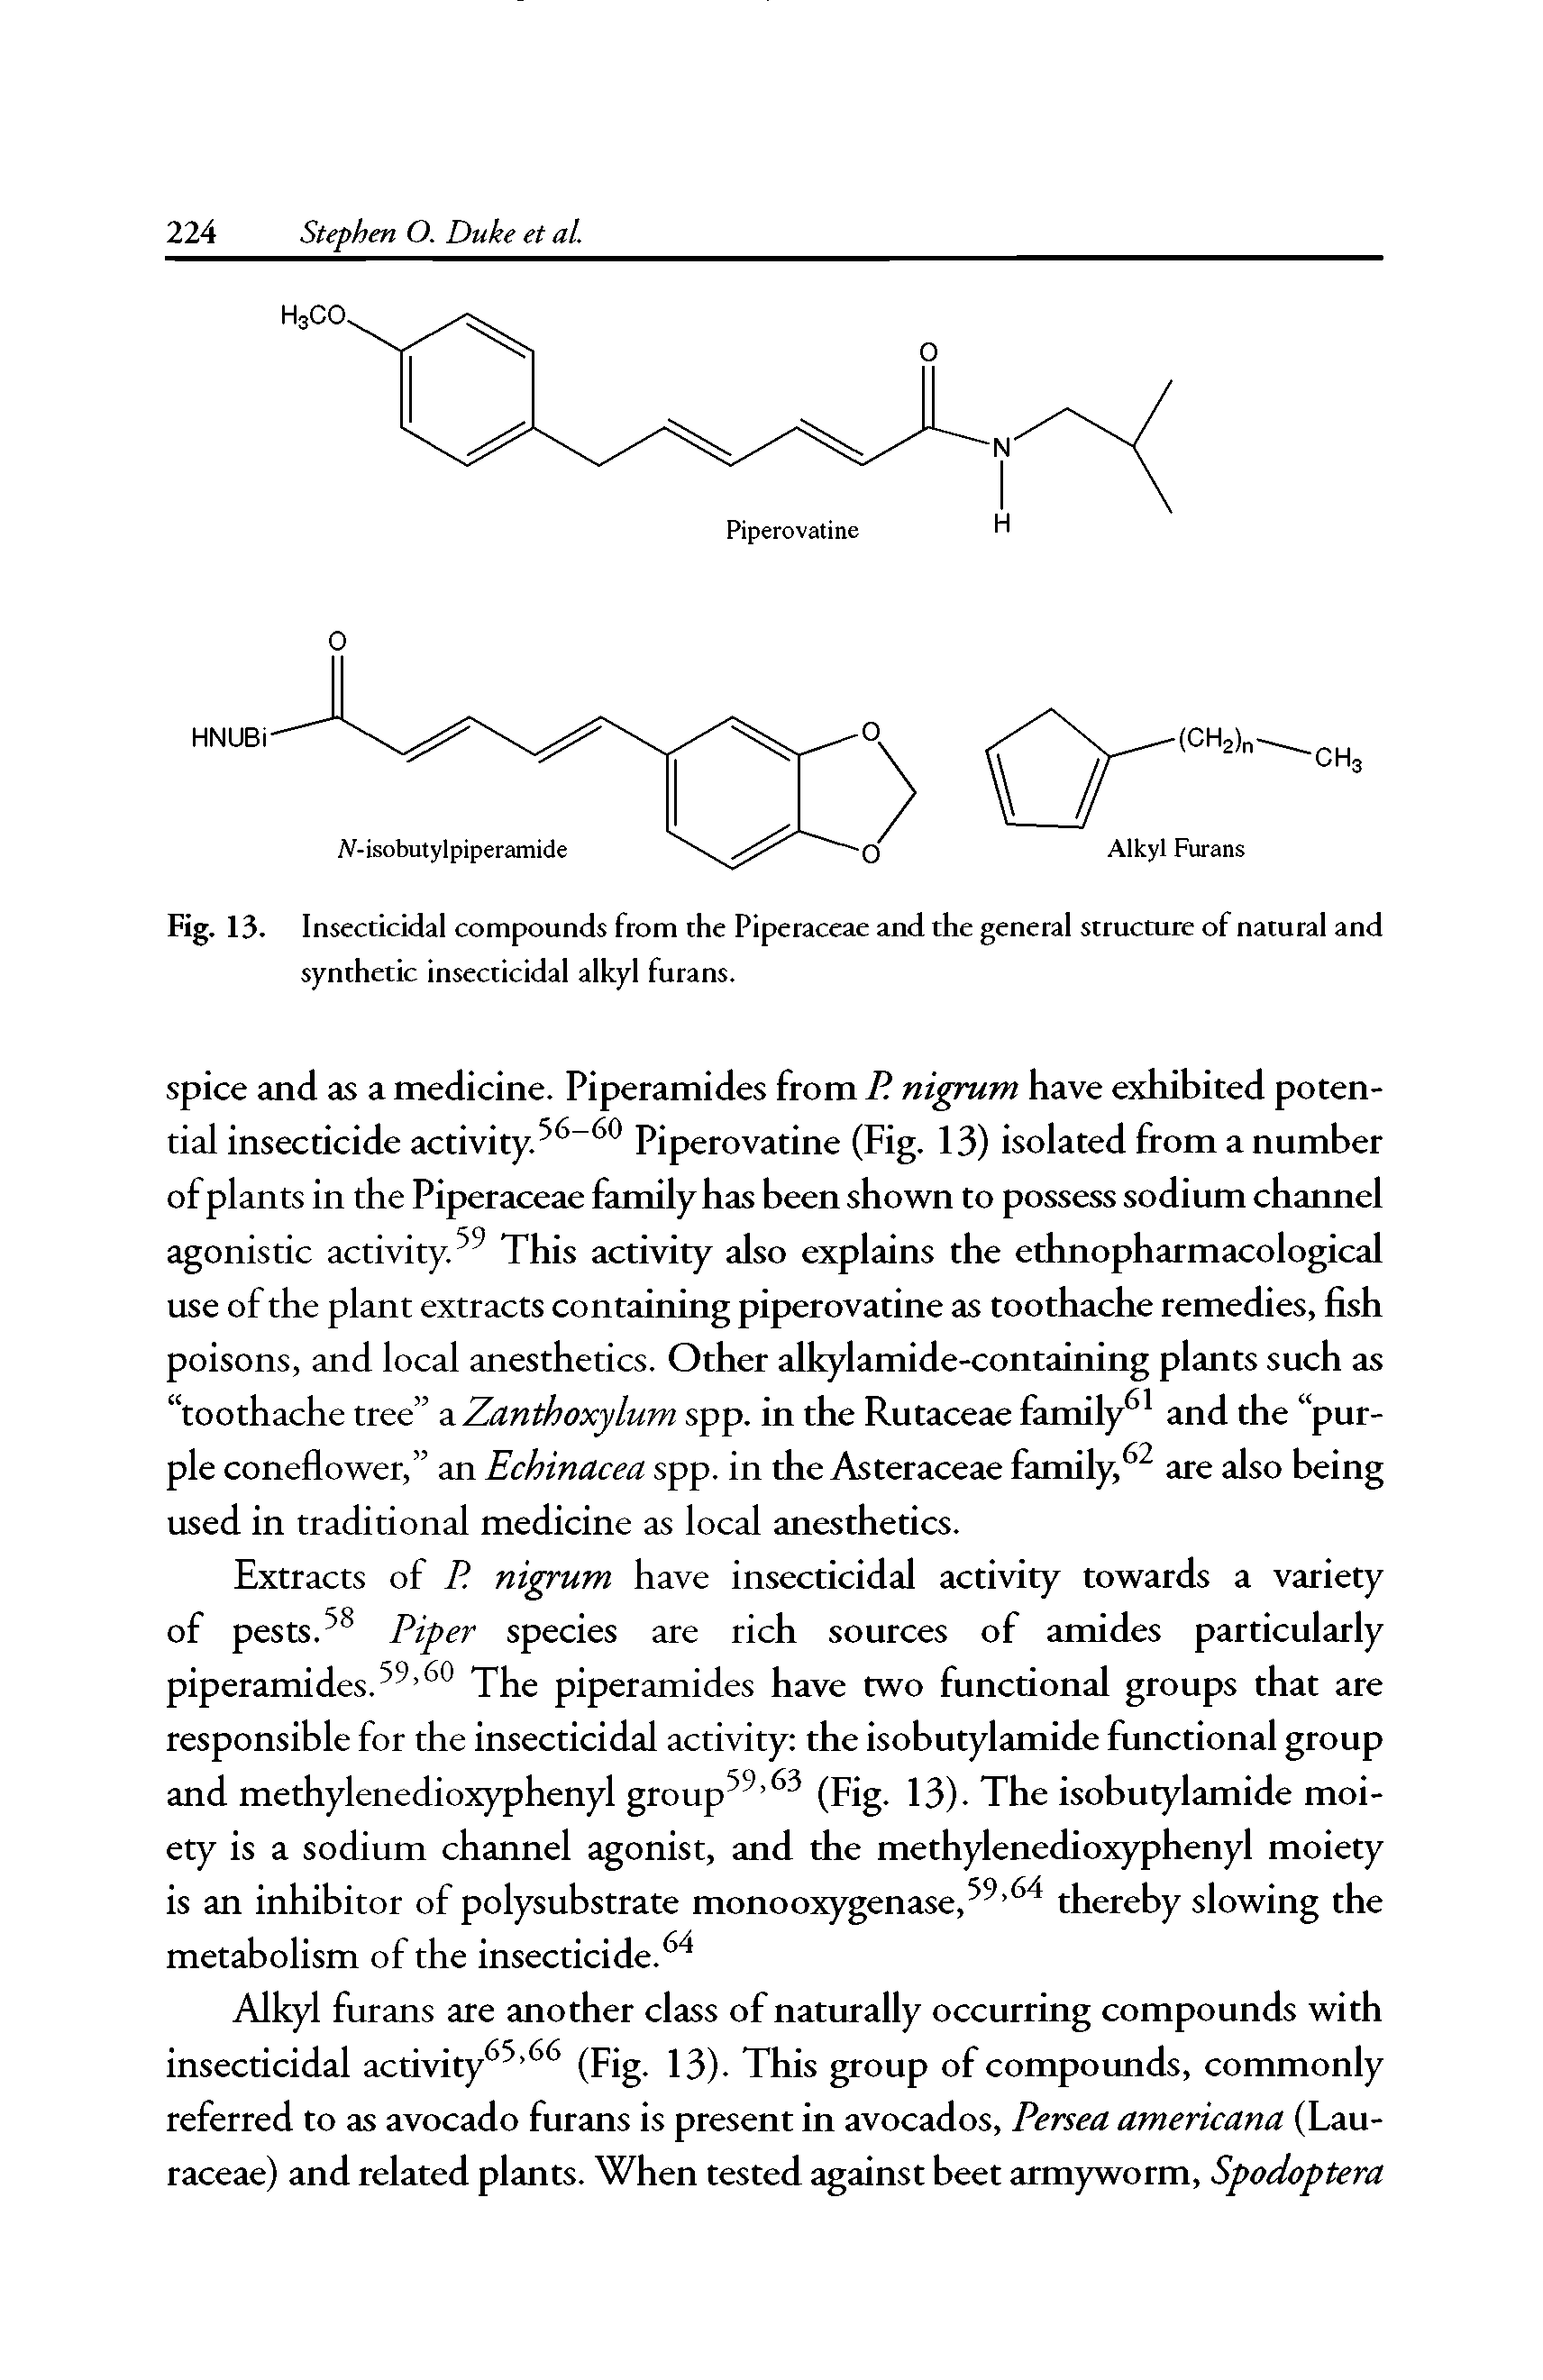 Fig. 13. Insecticidal compounds from the Piperaceae and the general structure of natural and synthetic insecticidal alkyl furans.